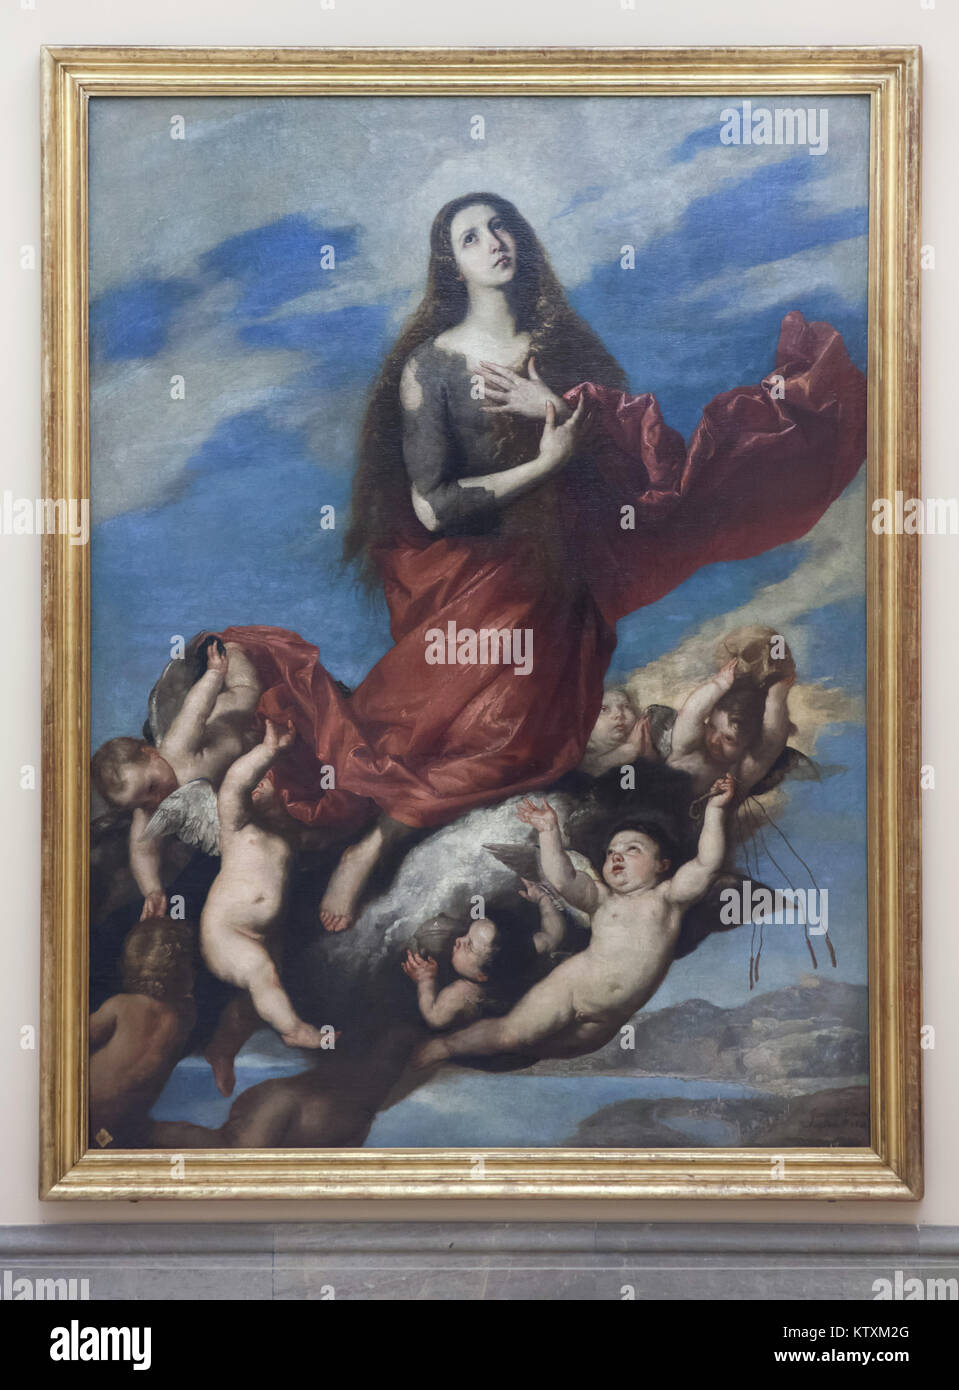 Painting 'Assumption of Mary Magdalene' by Spanish Baroque painter Jusepe de Ribera (1636) on display in the Real Academia de Bellas Artes de San Fernando (Royal Academy of Fine Arts of San Fernando) in Madrid, Spain. Stock Photo